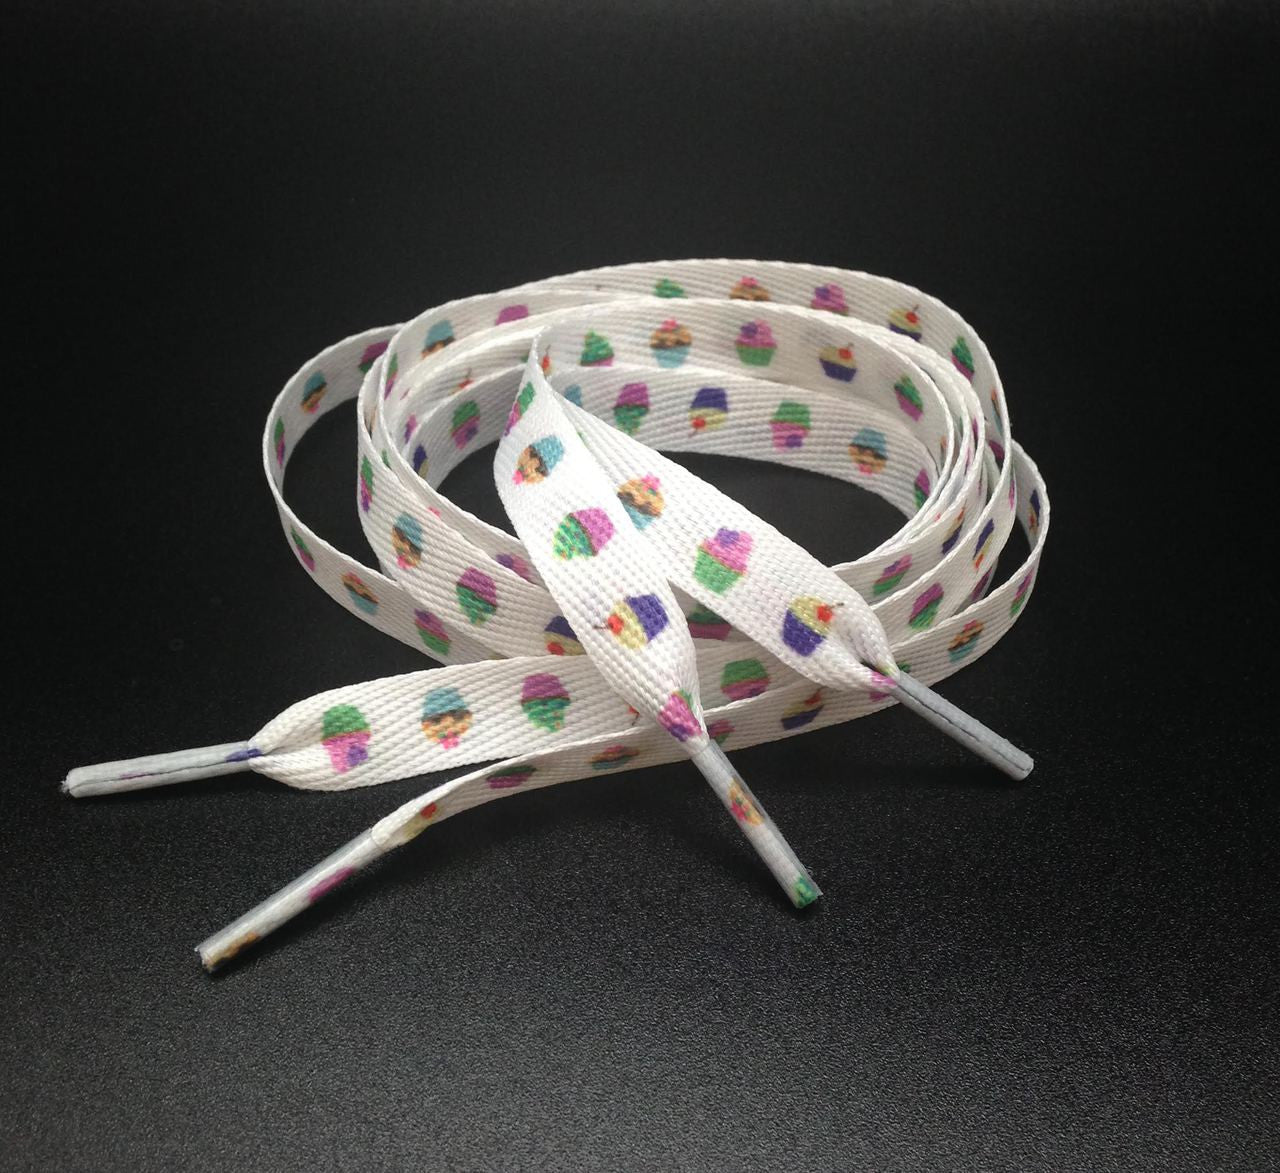 Shoelaces with Cupcakes in a row printed on standard woven material 45" long